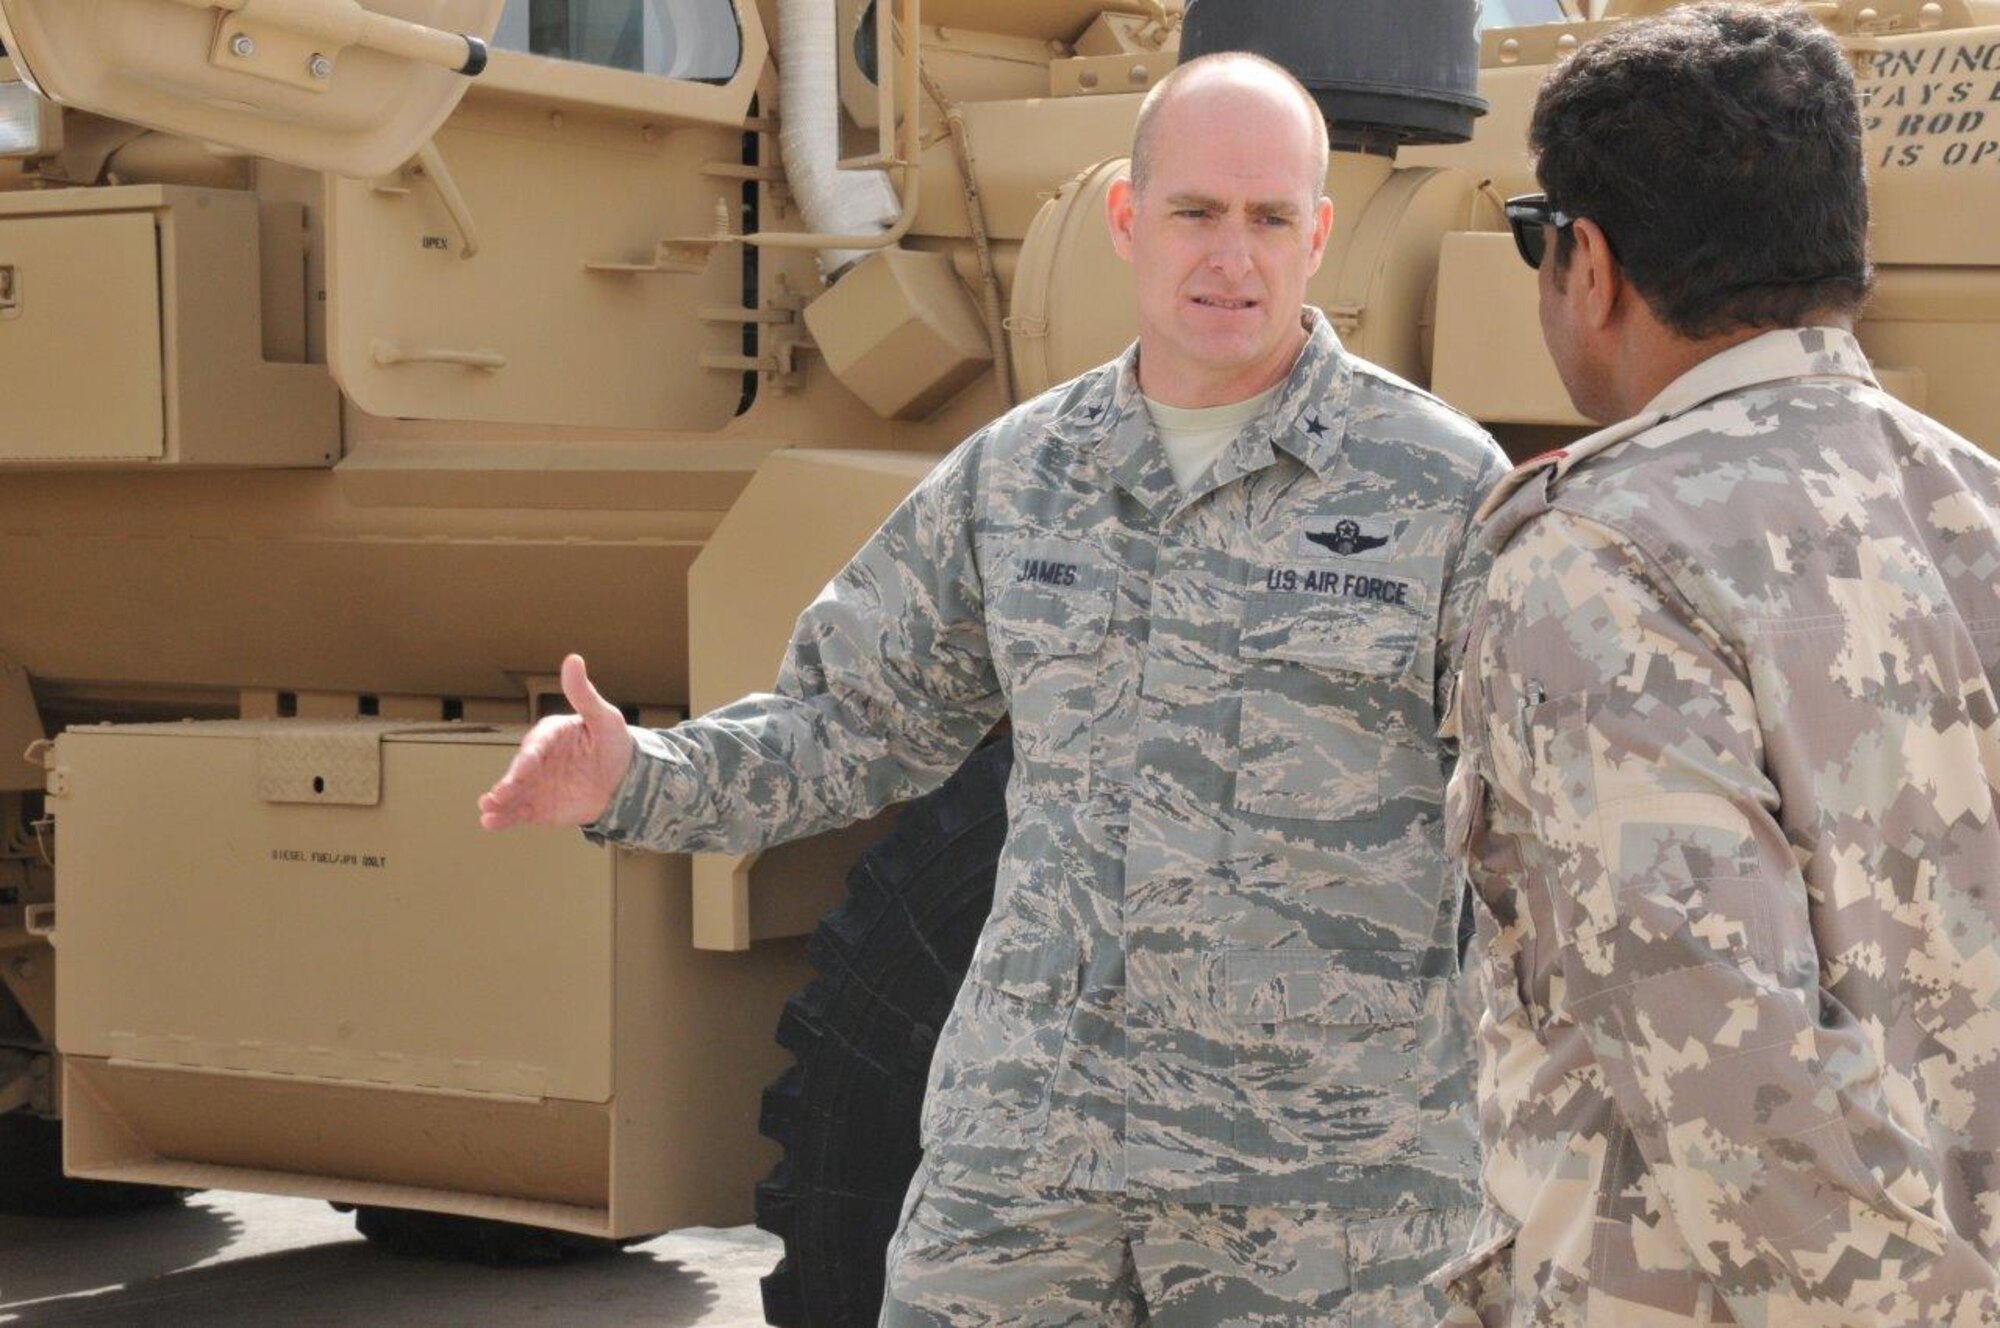 Brig. Gen. Darren James, 379th Air Expeditionary Wing commander, shows a member of the Qatar military a mine resistant ambush protectant vehicle during Flight Line Fest at Al Udeid Air Base, Qatar Jan. 10. Flight Line Fest is a joint partnership between the 379th AEW and the Qatar Emiri Air Force held to foster relations between Qatar and the United States. (U.S. Air Force photo by Tech. Sgt. Terrica Y. Jones)